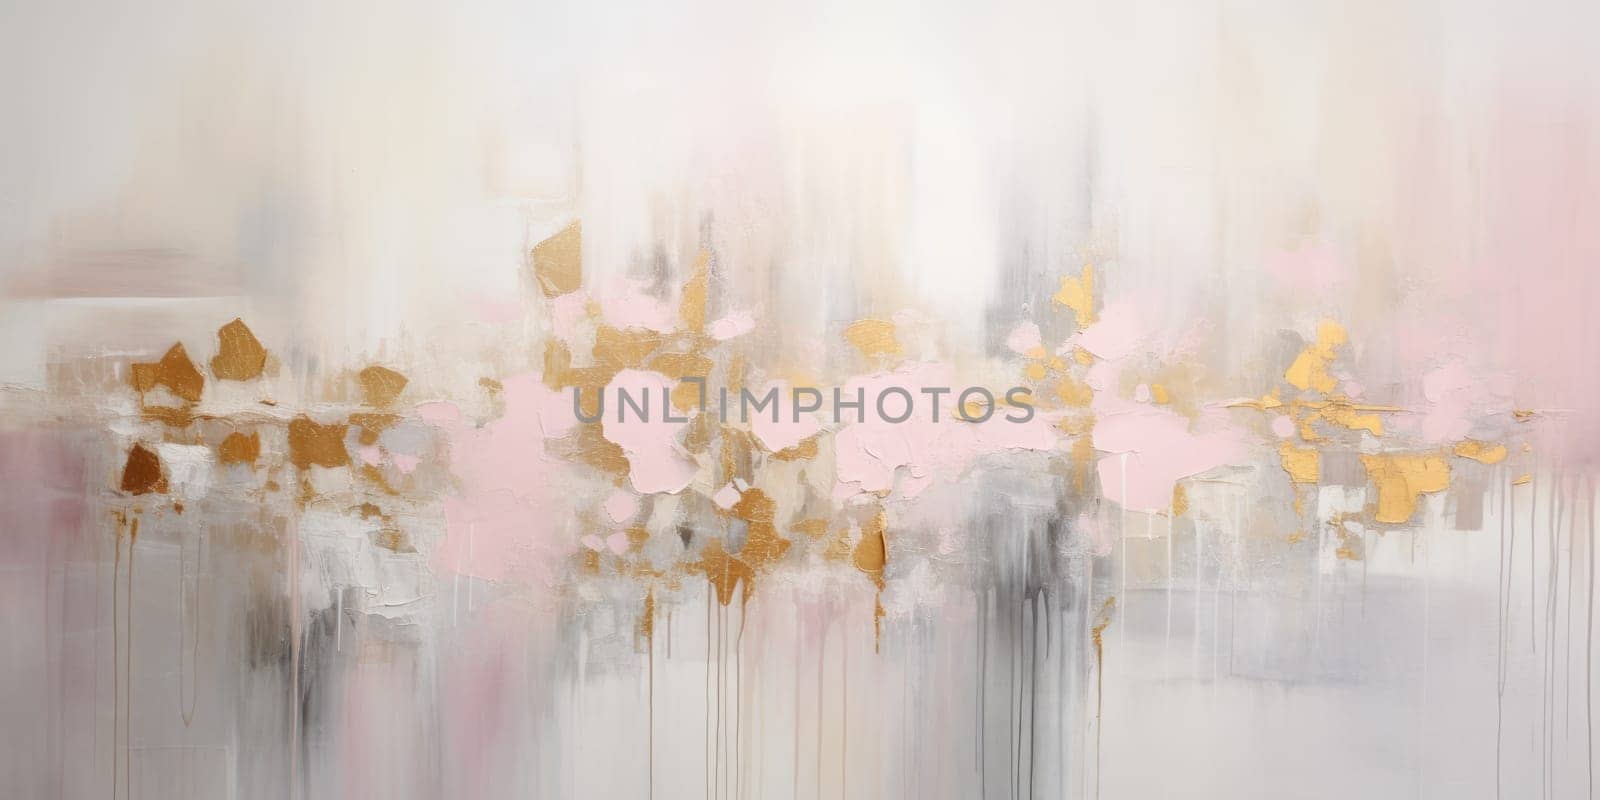 The abstract picture of the gold, pink bright colour that has been painted or splashed on the white blank background wallpaper to form the random shape that cannot be describe yet beautiful. AIGX01.